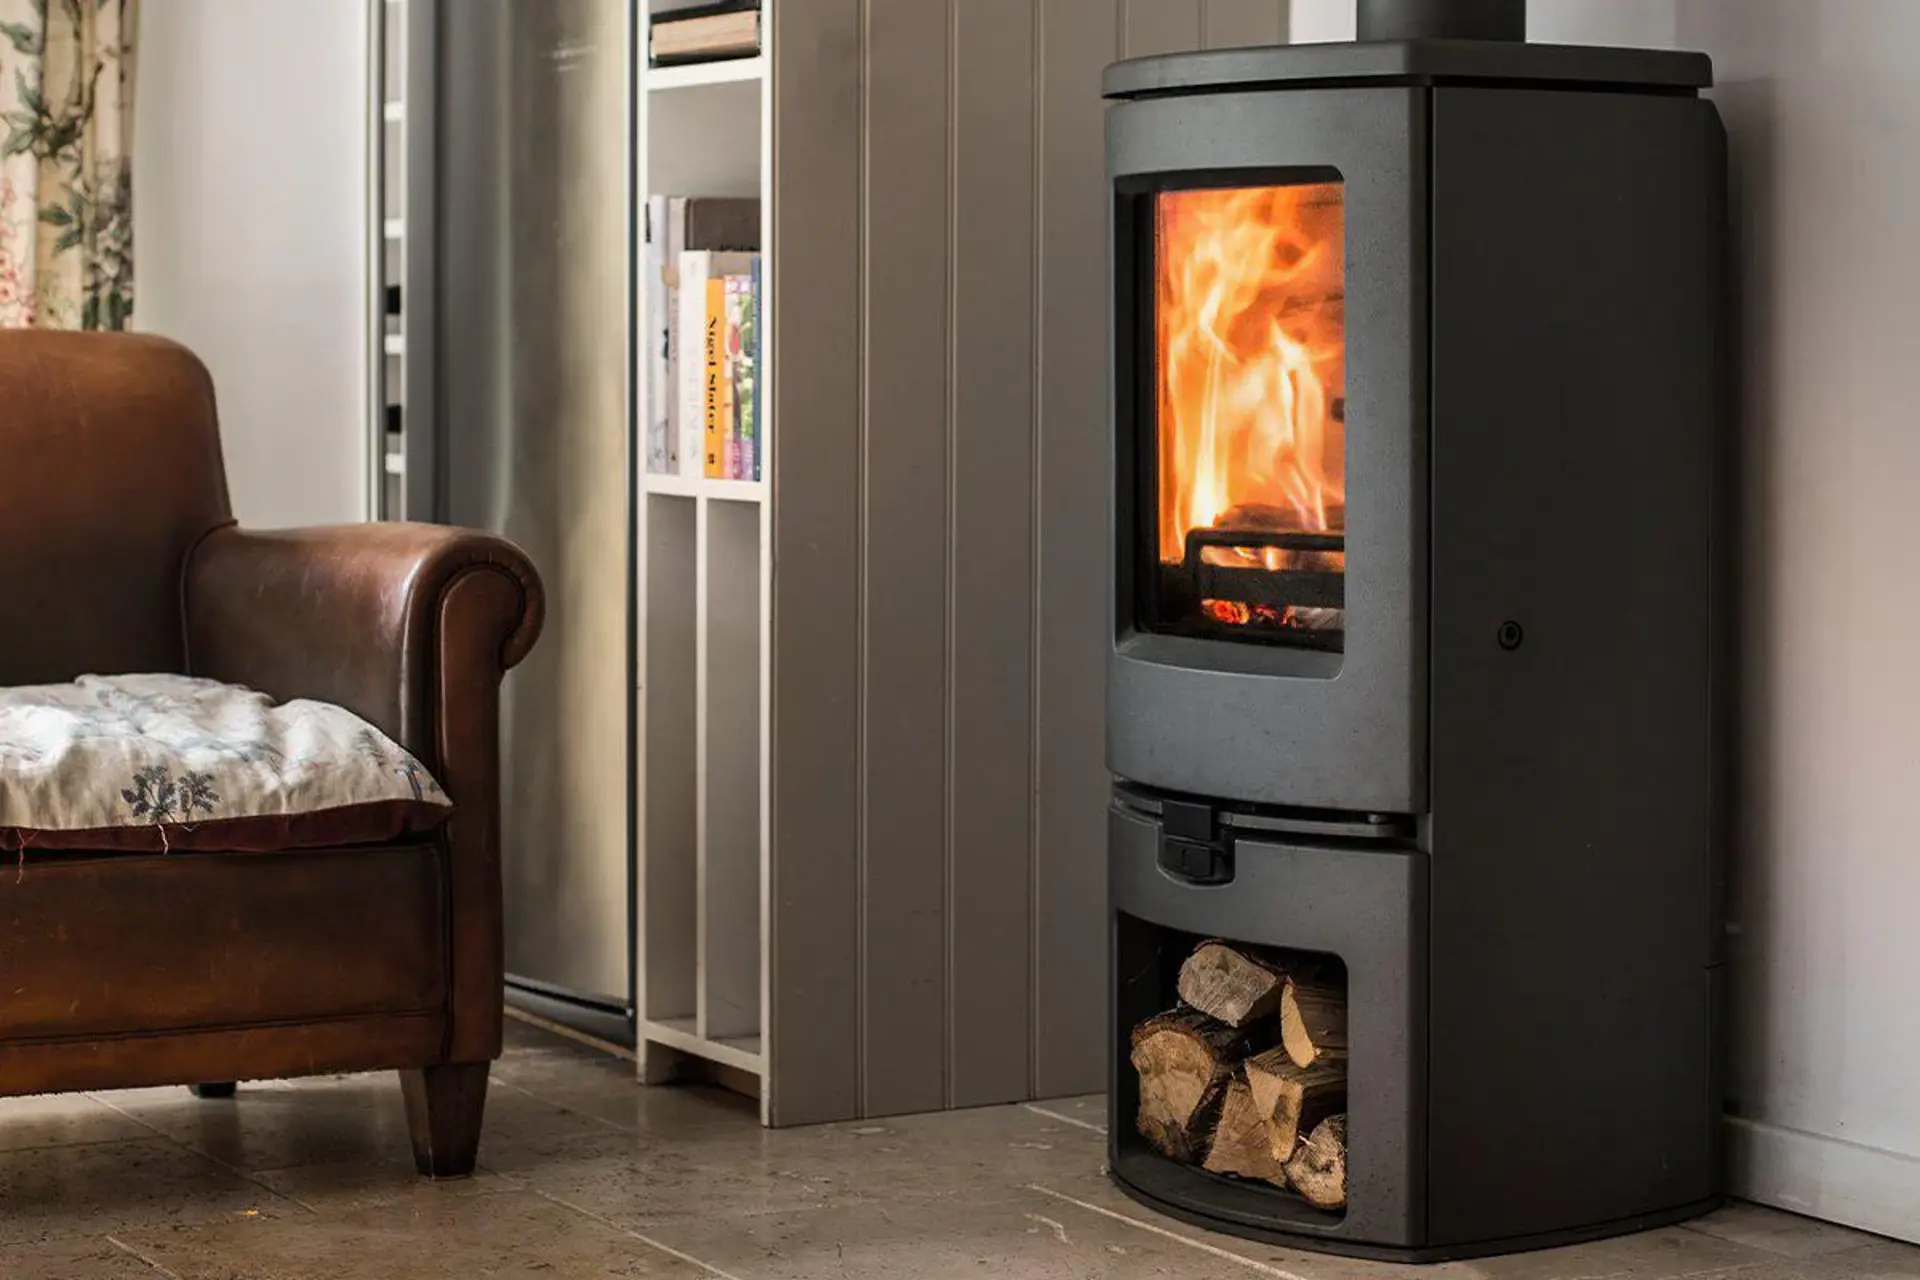 Charnwood-ARC-7-Multi-Fuel-Wood-Burning-Stove-Charnwood-Stoves-3_b132a289-0a5e-4808-888f-0d79f84be5bd_5000x.png